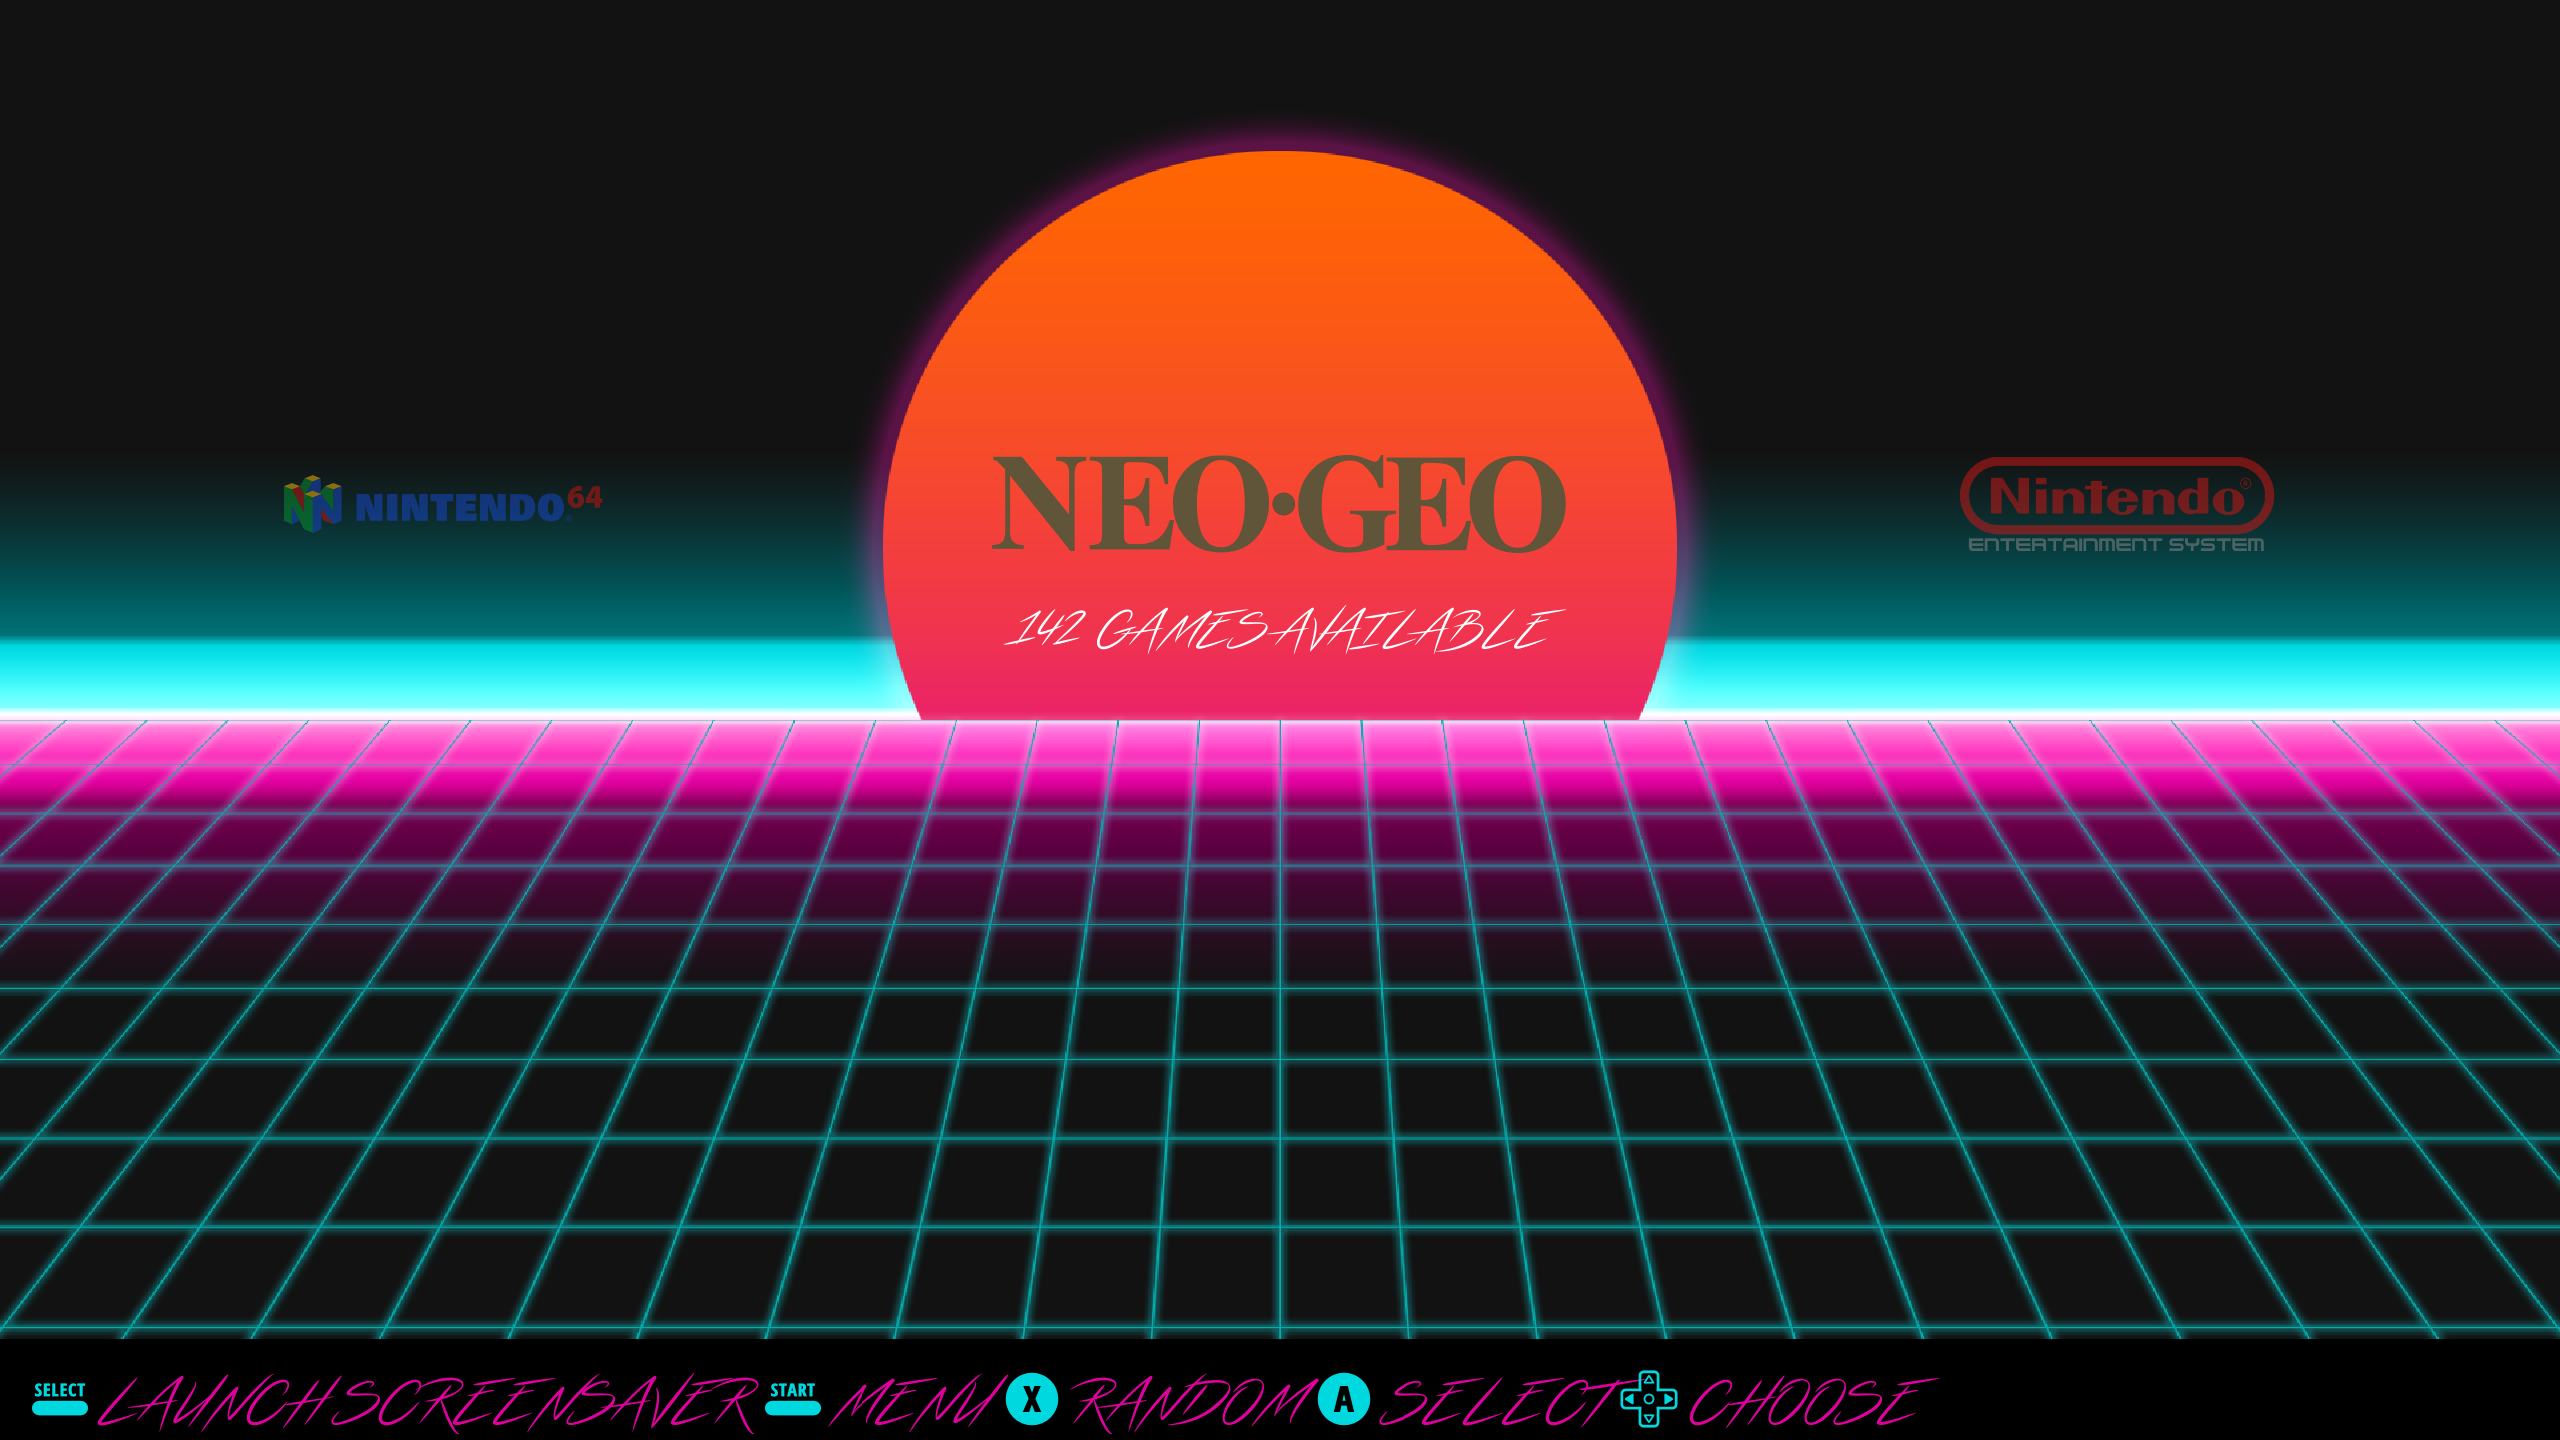 Theme Retrowave: Another Synthwave Inspired Theme